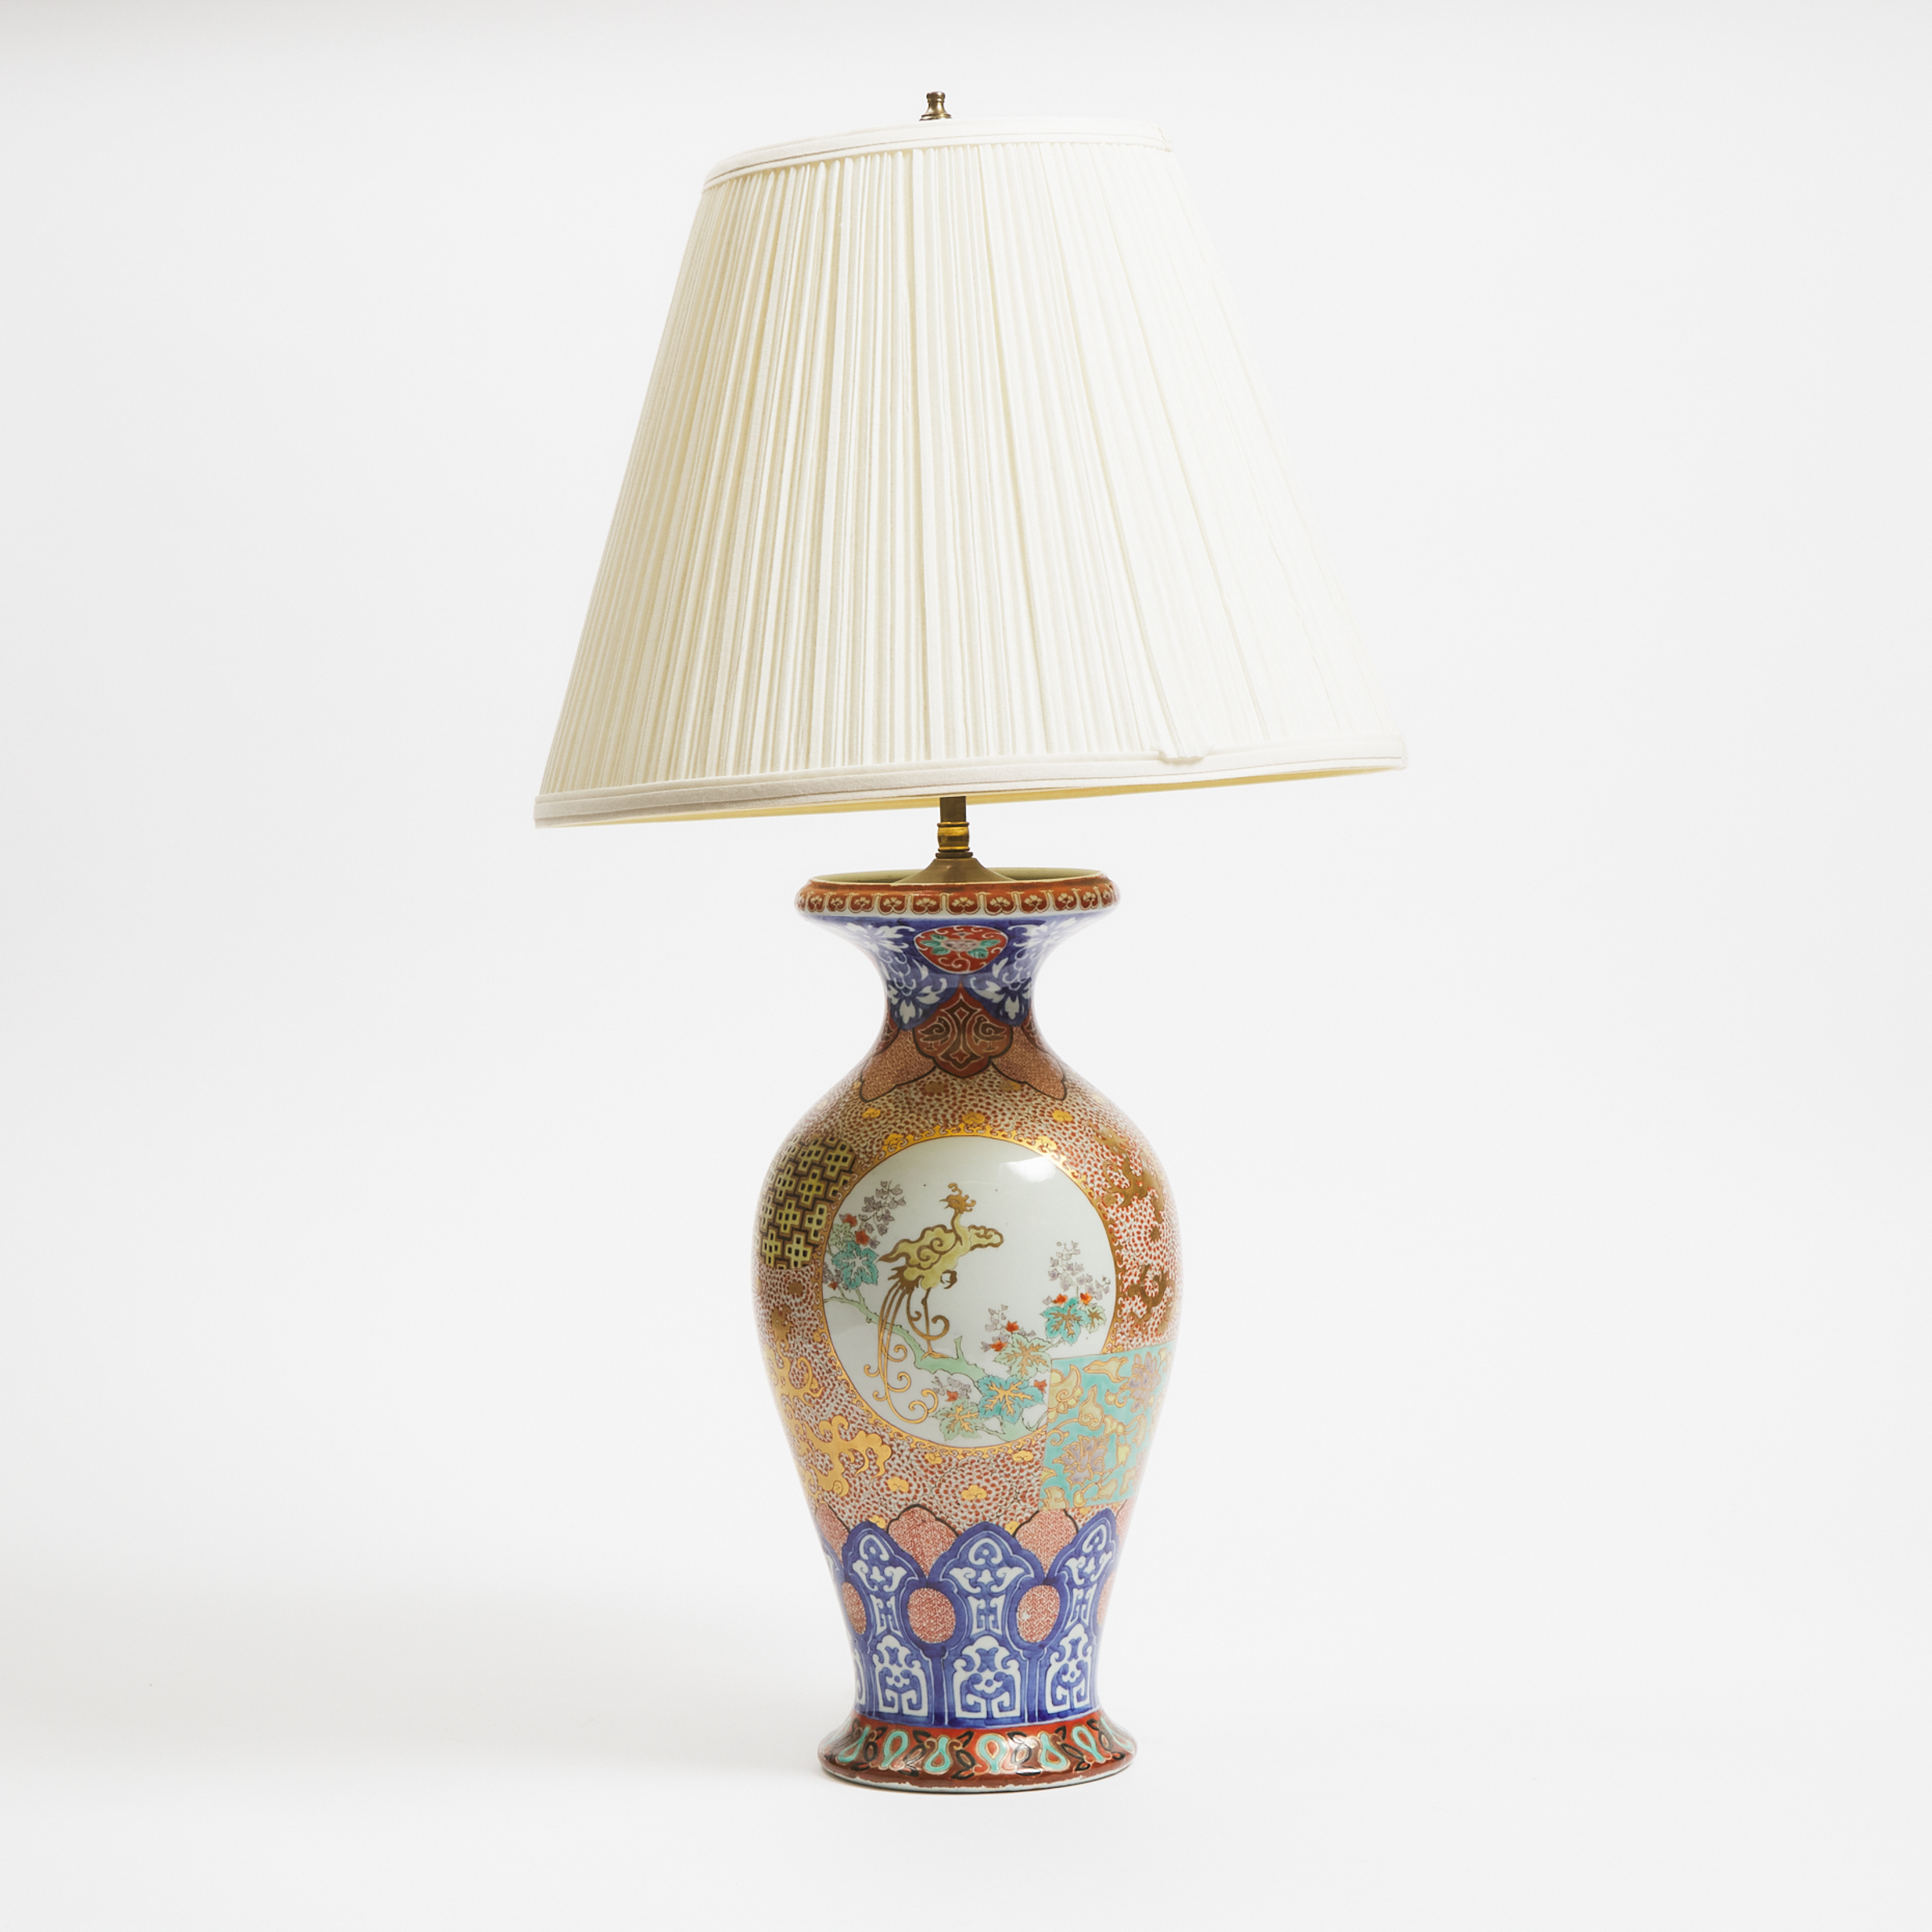 A Japanese Arita Vase Mounted as a Lamp, Early to Mid 20th Century